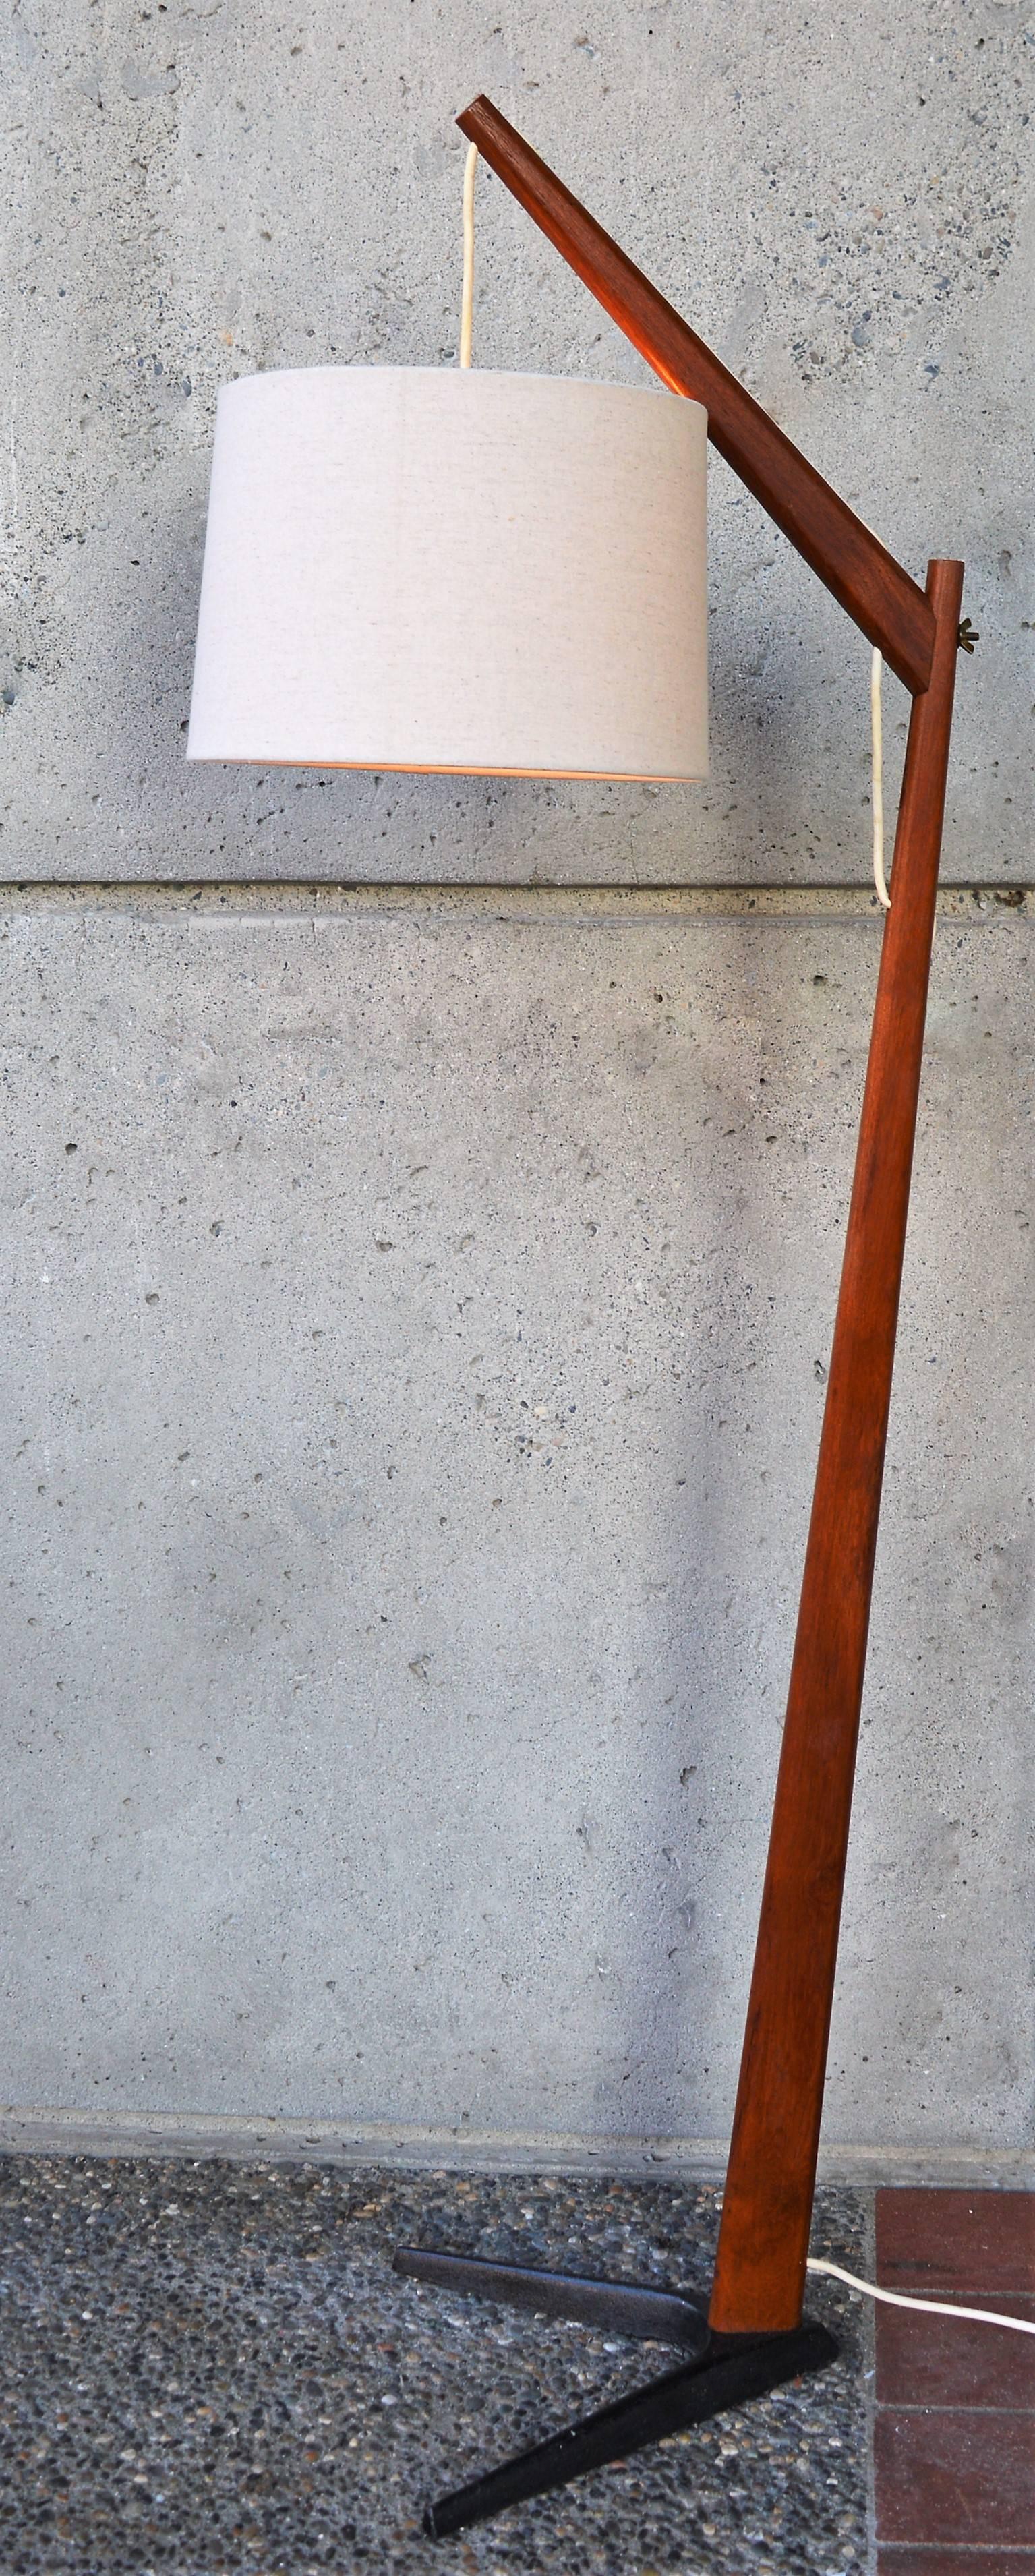 This superb and rare 1950s Danish modern teak floor lamp is attributed to Svend Aage Holm Sorensen. Featuring his iconic V-shaped iron base, a thick solid teak stem that tapers gently as it reaches the top where it connects to the teak arm